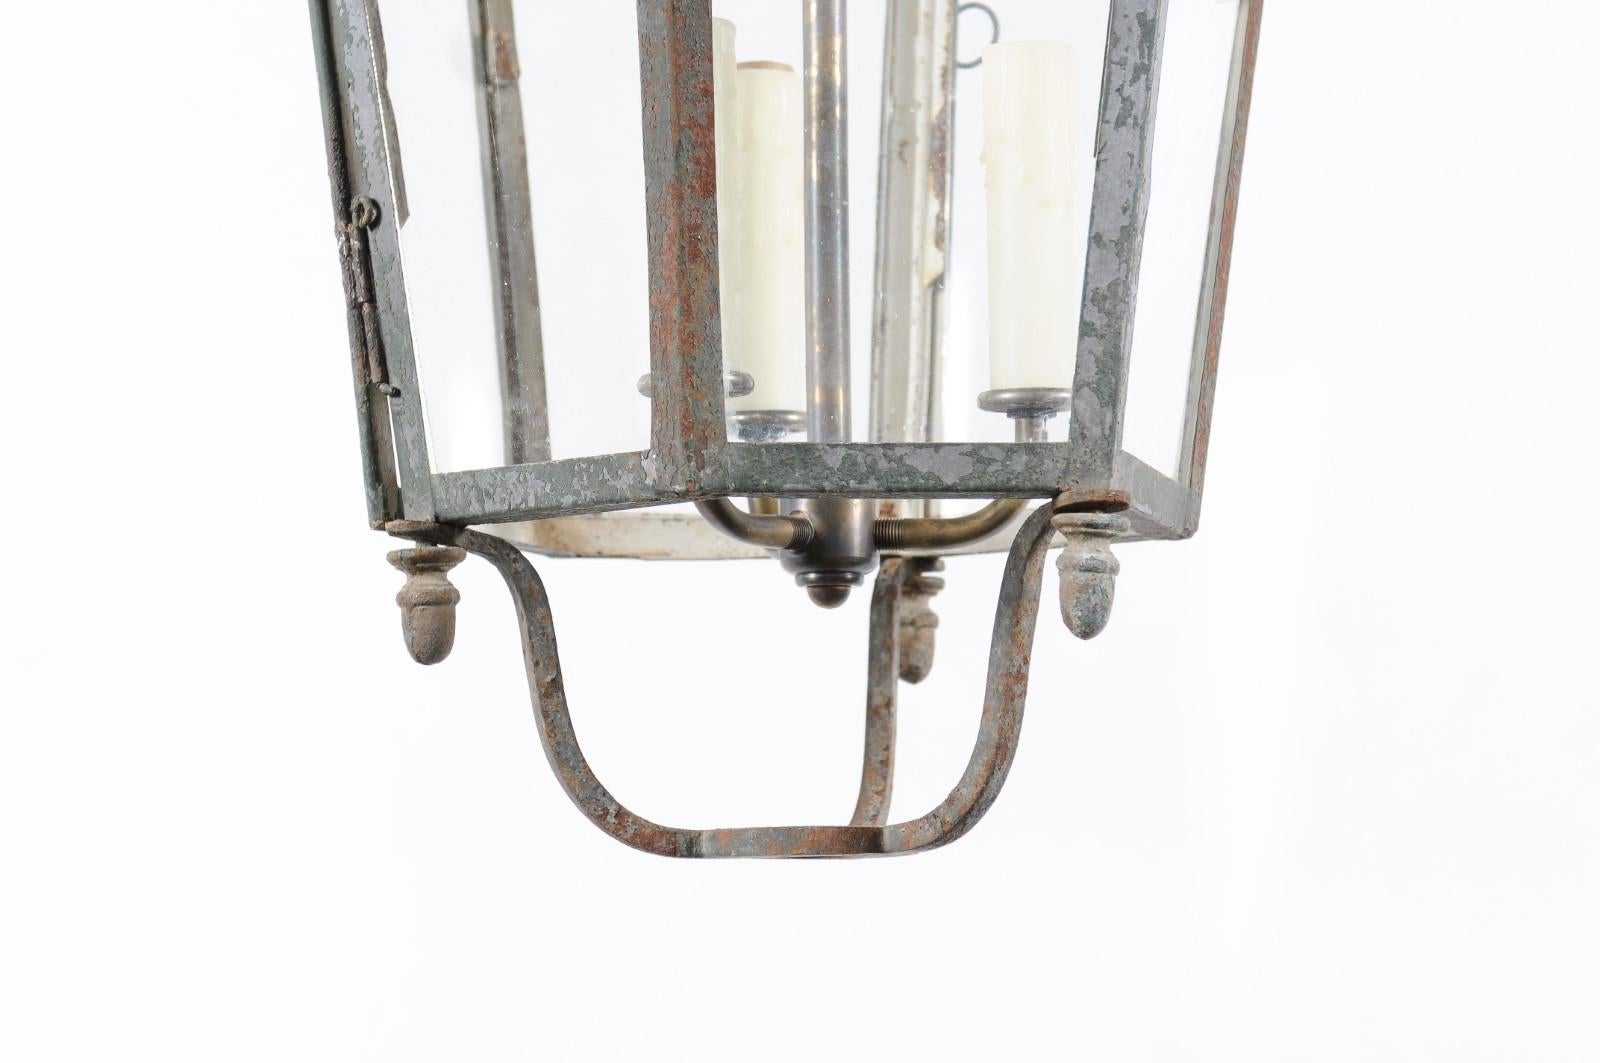  Venetian Painted Iron Street Lantern with 3 Lights, Late 19th Century For Sale 1